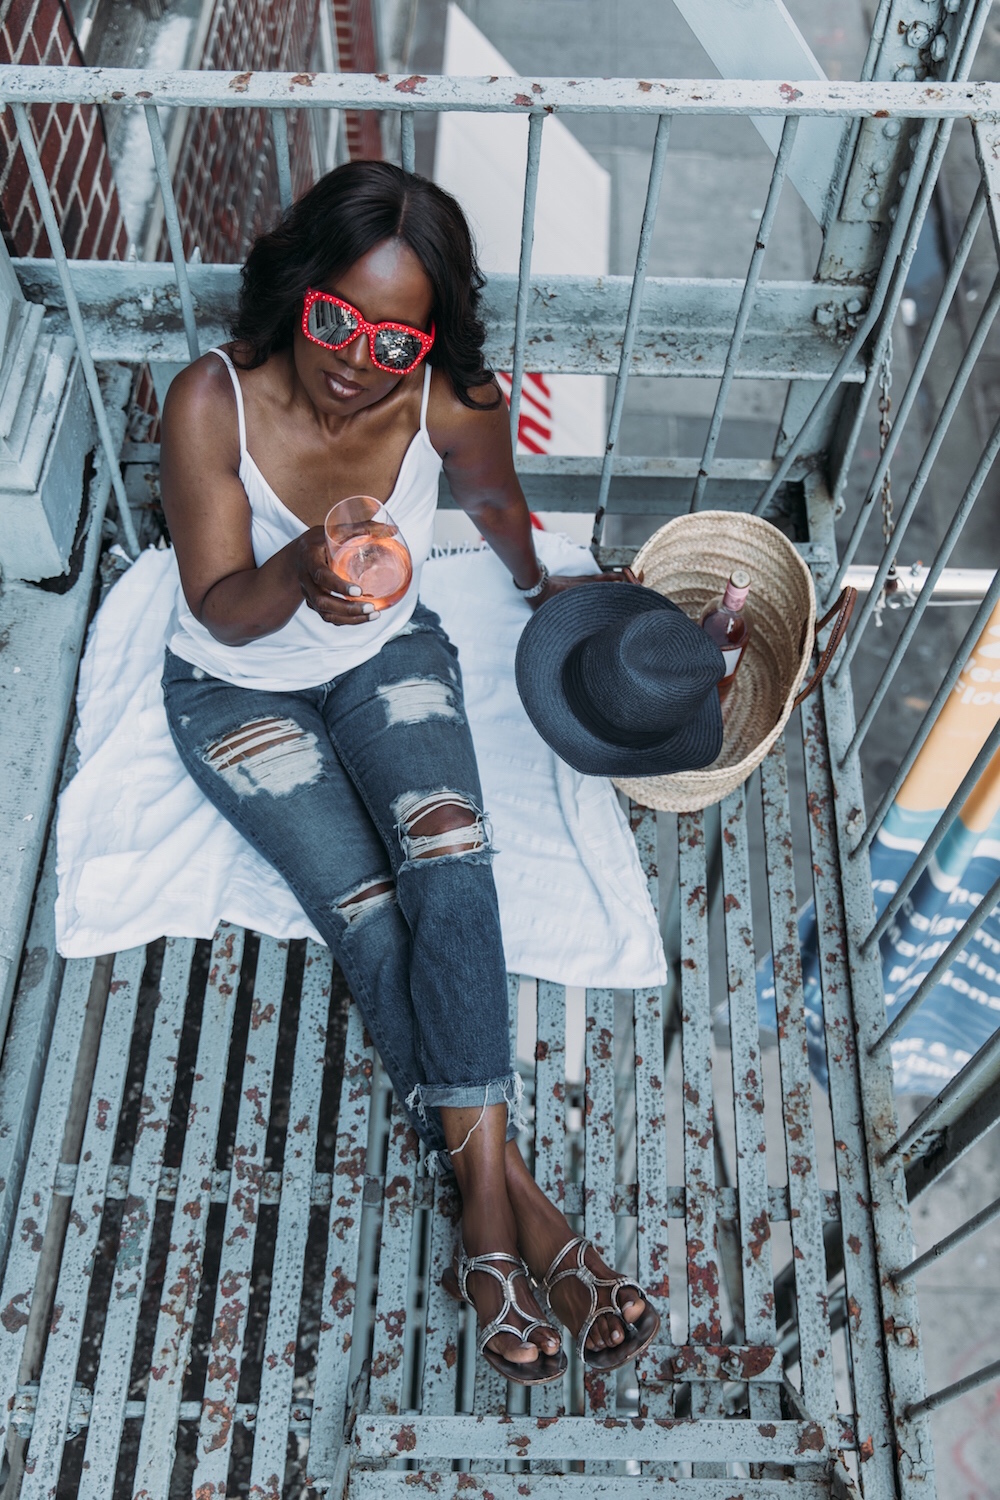 Fire escapes, July 4th 2018, Red Sunnies, Summer in NYC, Picnics